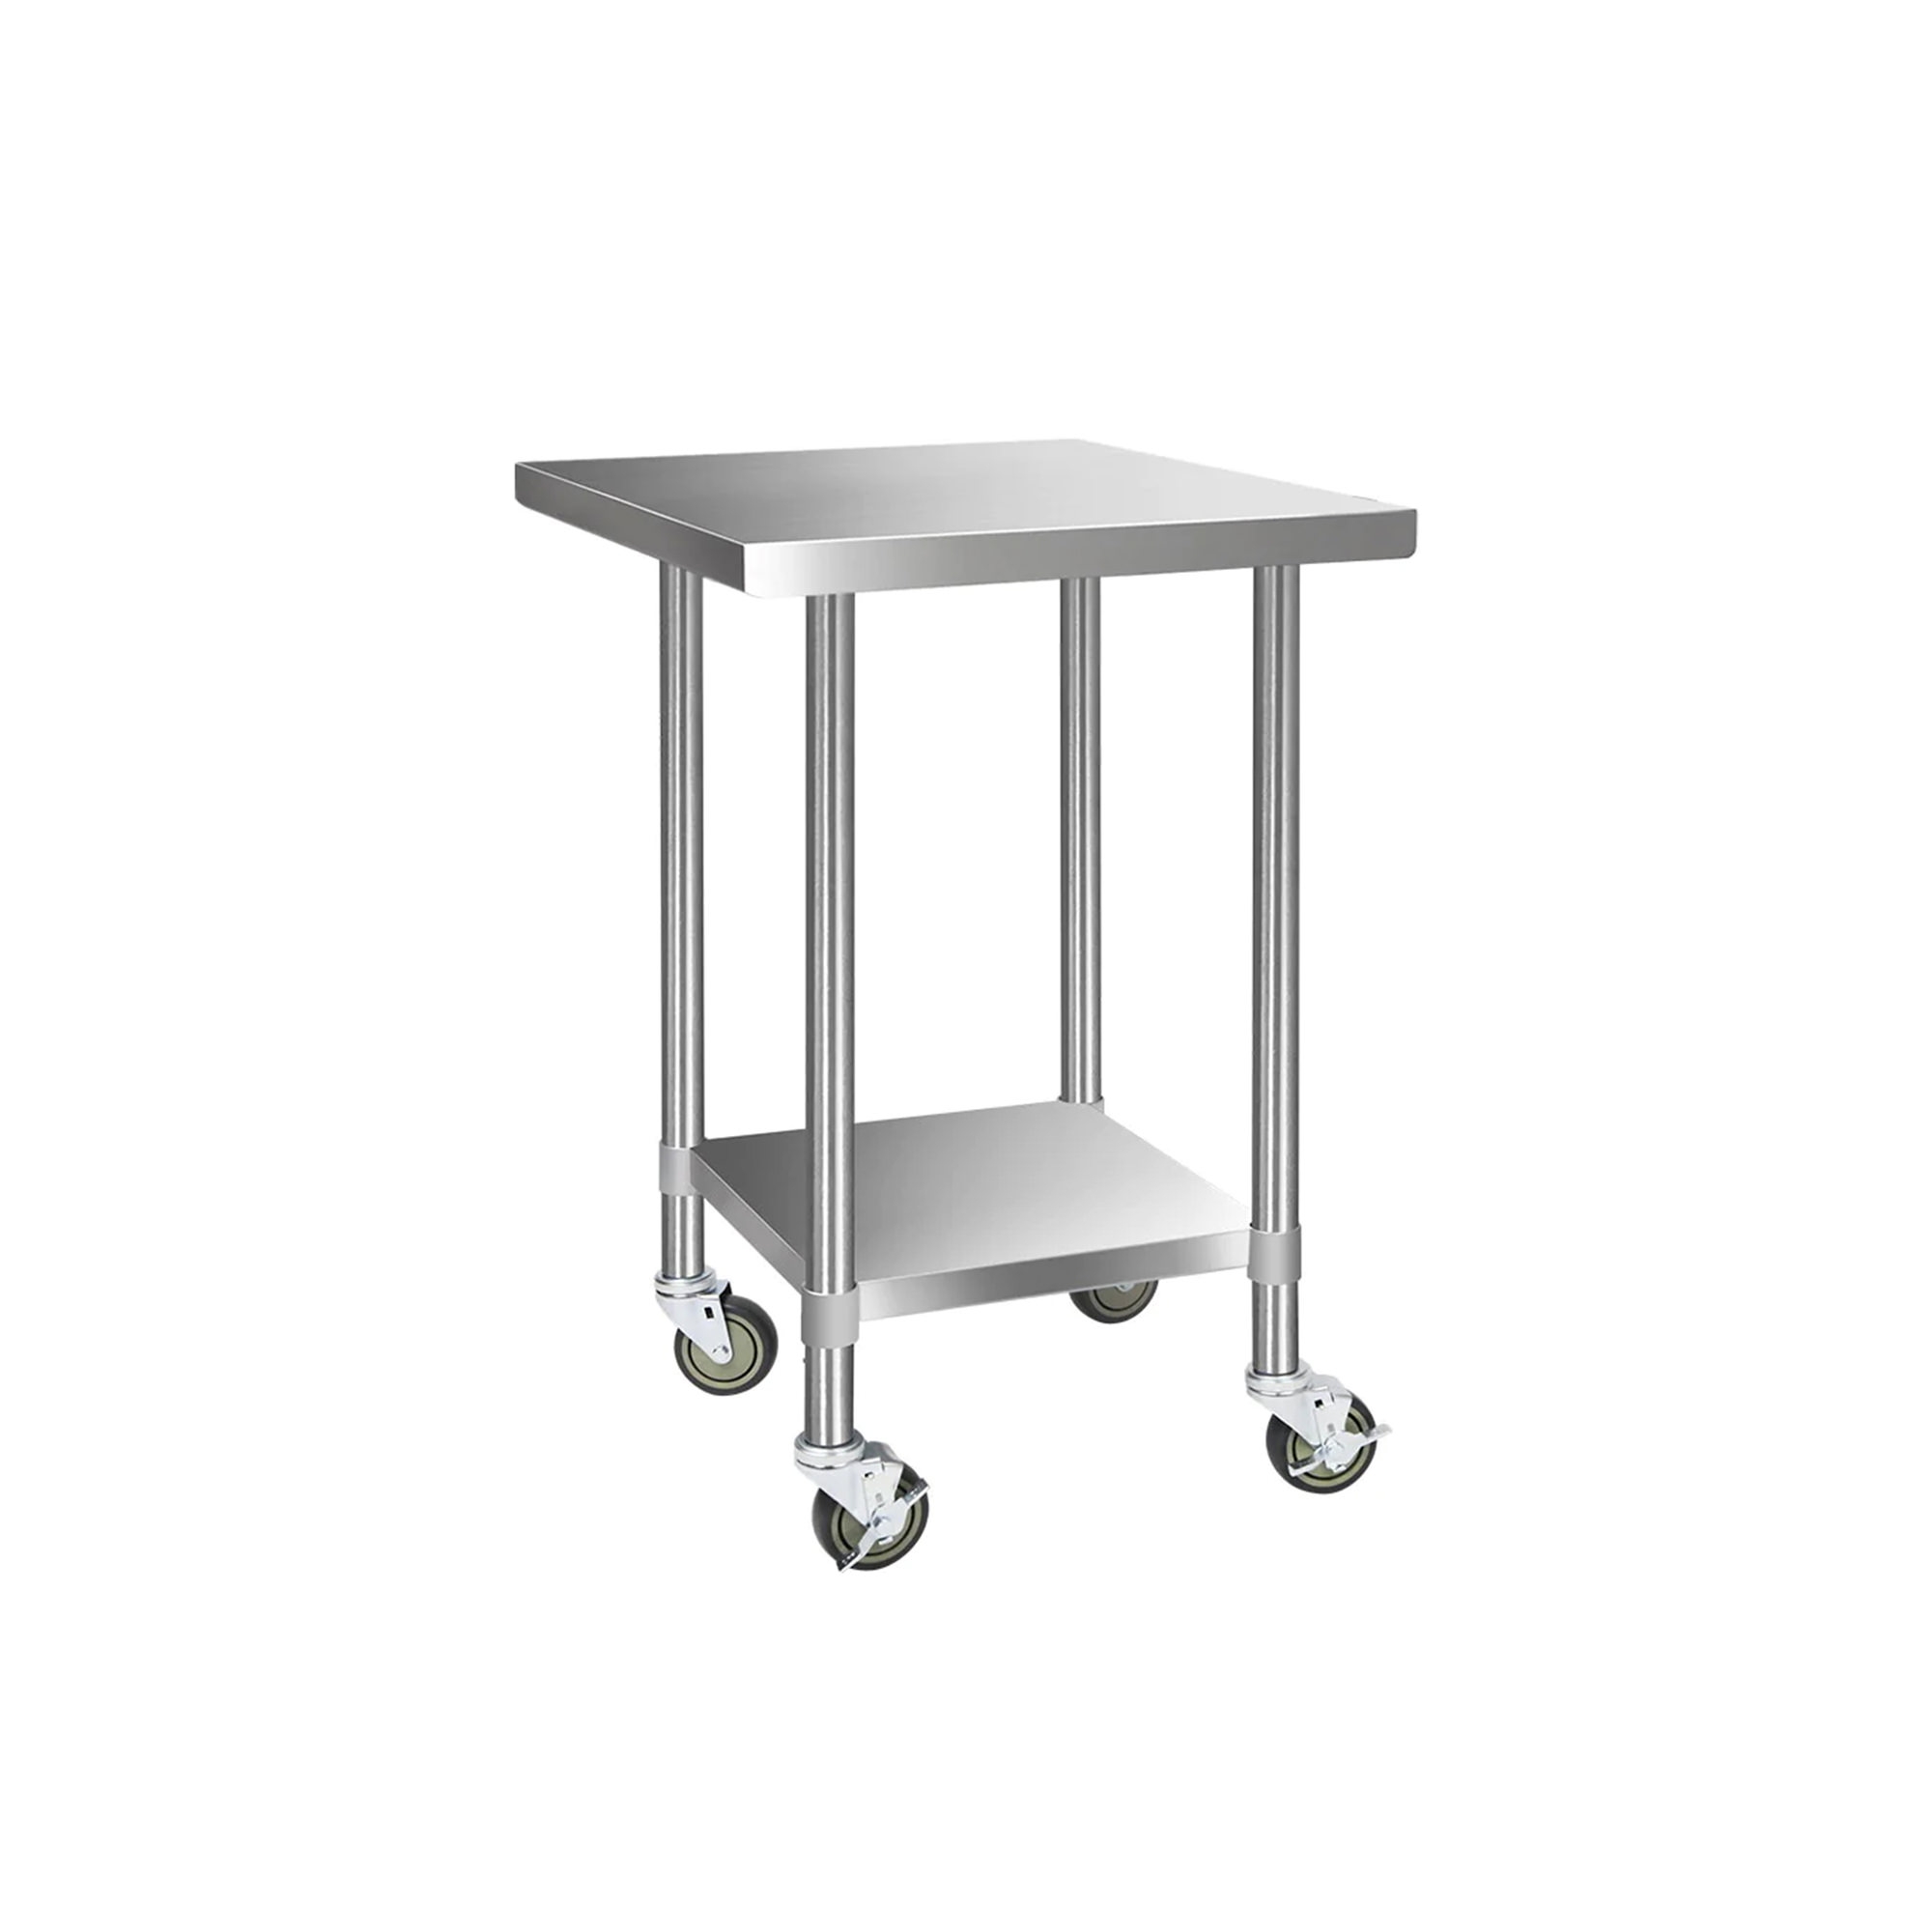 Cefito 430 Stainless Steel Kitchen Bench with Wheels 76x76cm Image 1